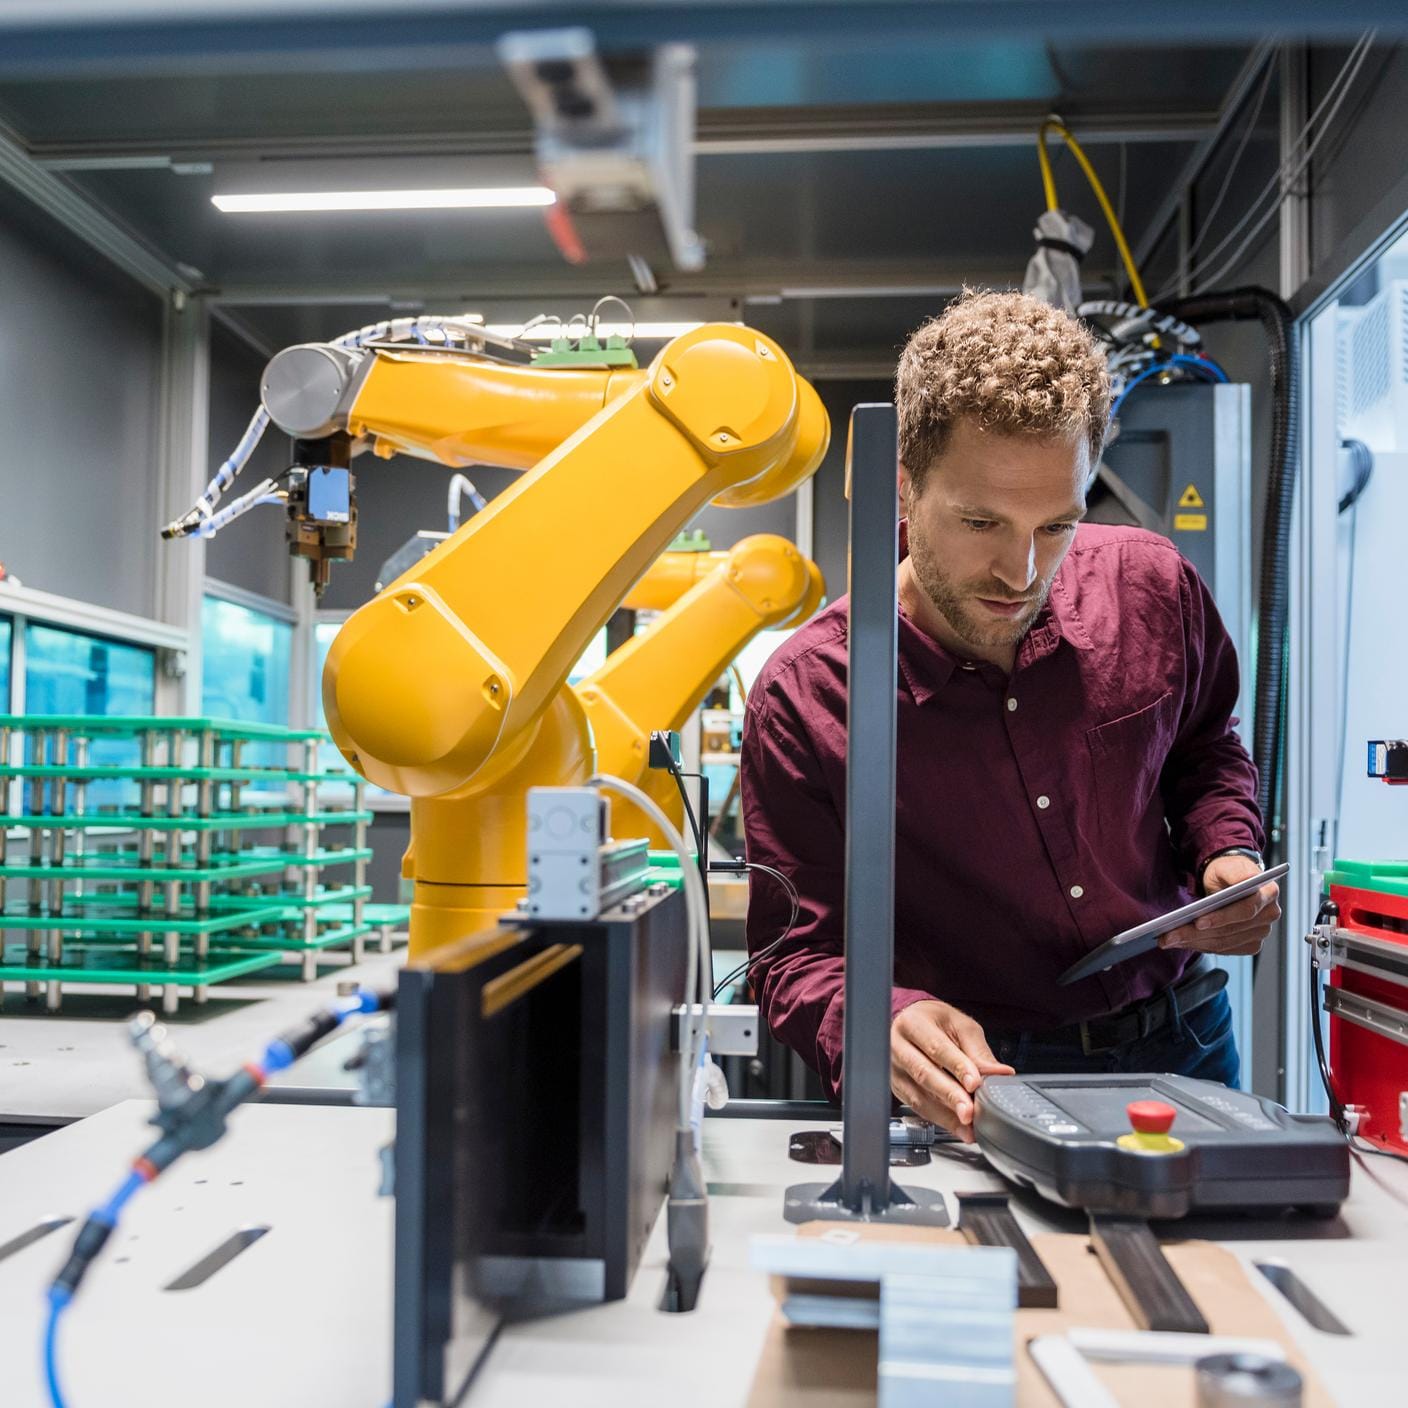 Ethical and trustworthy Artificial Intelligence - Businessman checking industrial robot in high tech company